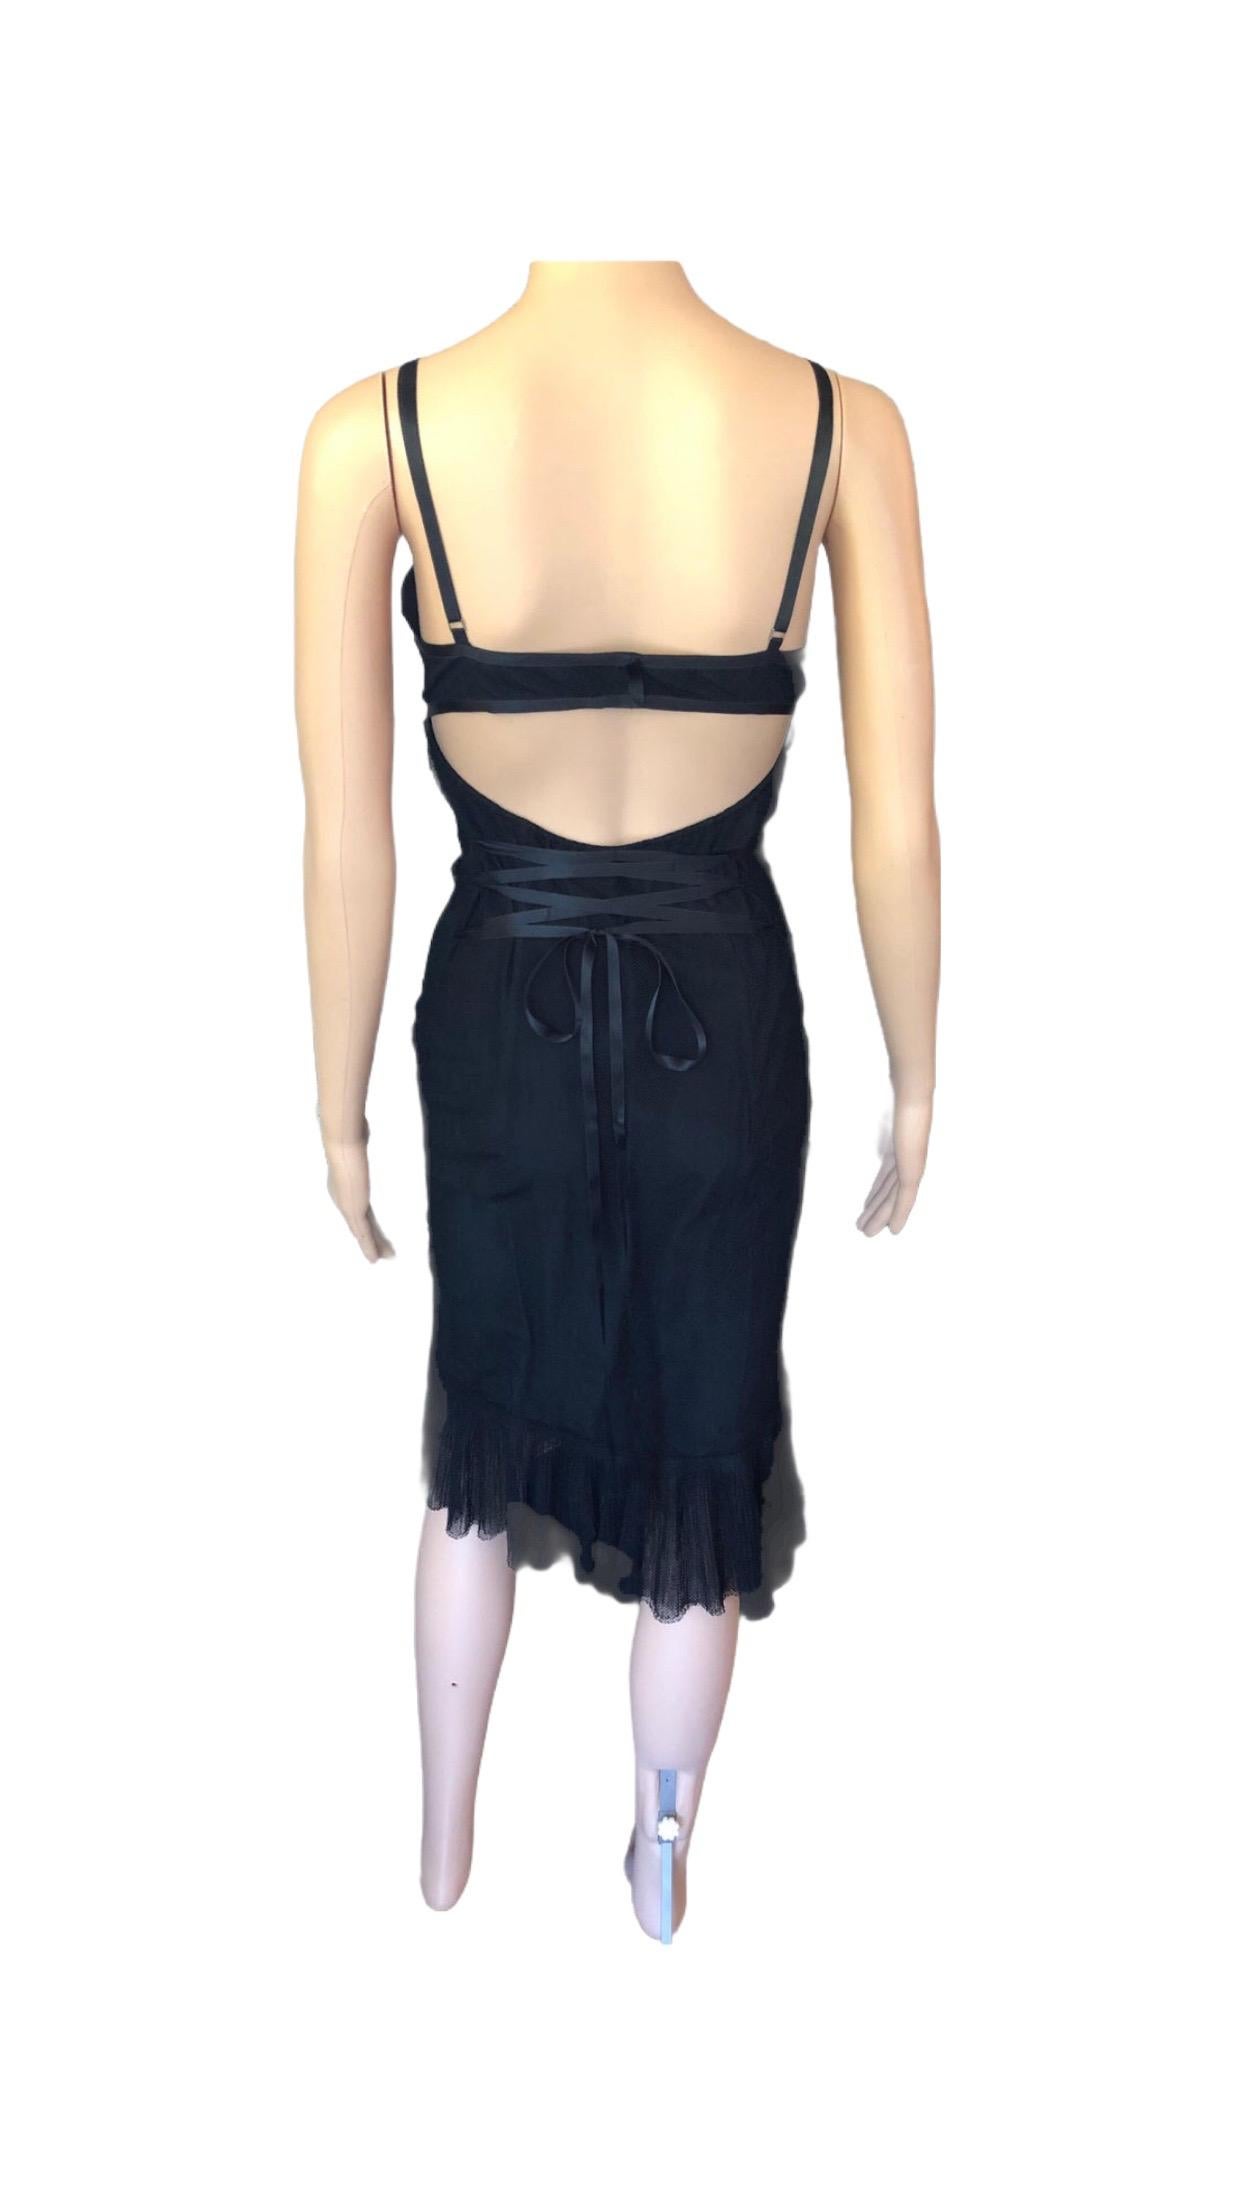 Gucci by Tom Ford F/W 2001 Cutout Back Mesh Black Dress For Sale 2